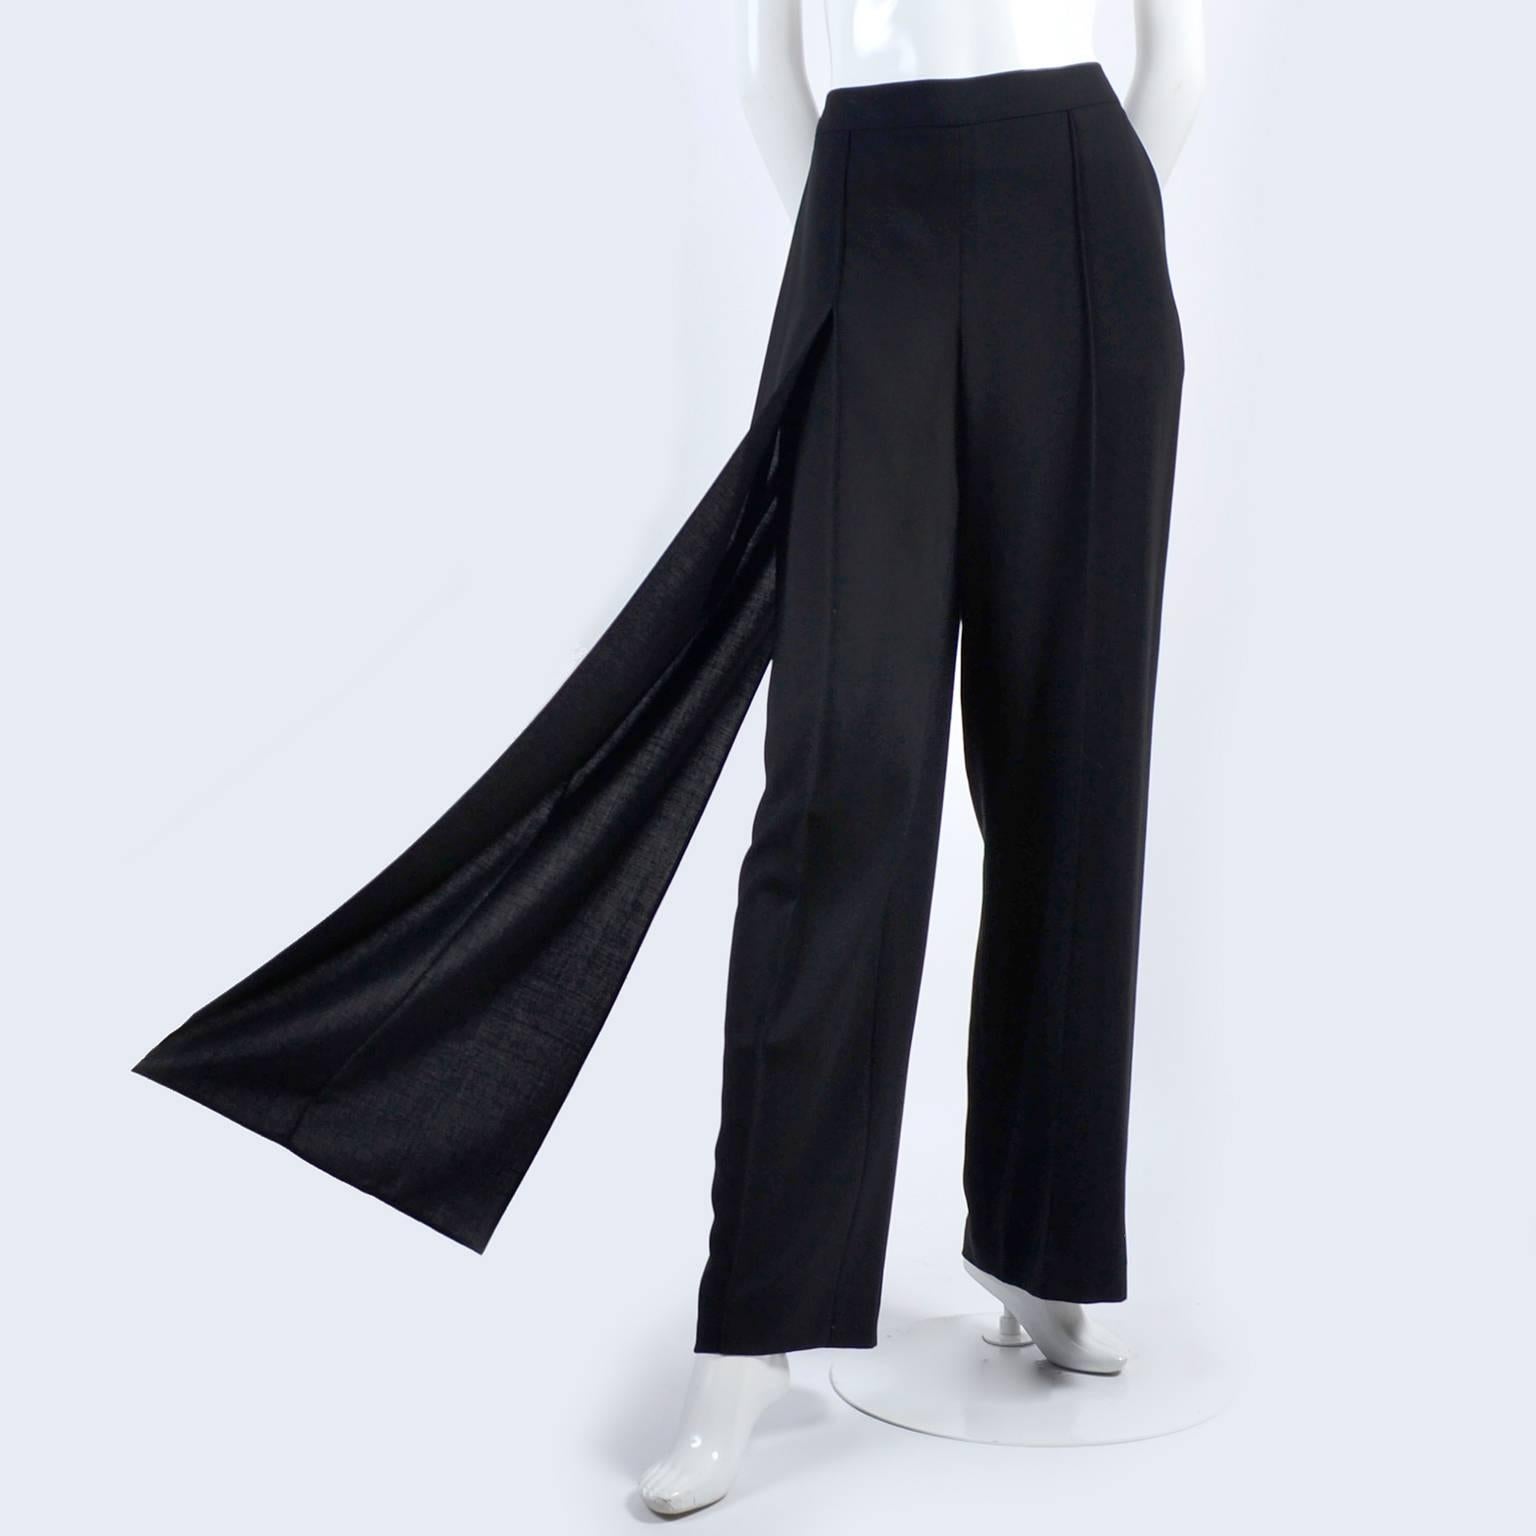 New 1990s Black Wool Chanel Pants W High Waist & Side Fly Away Panel 40 US 10 For Sale 4